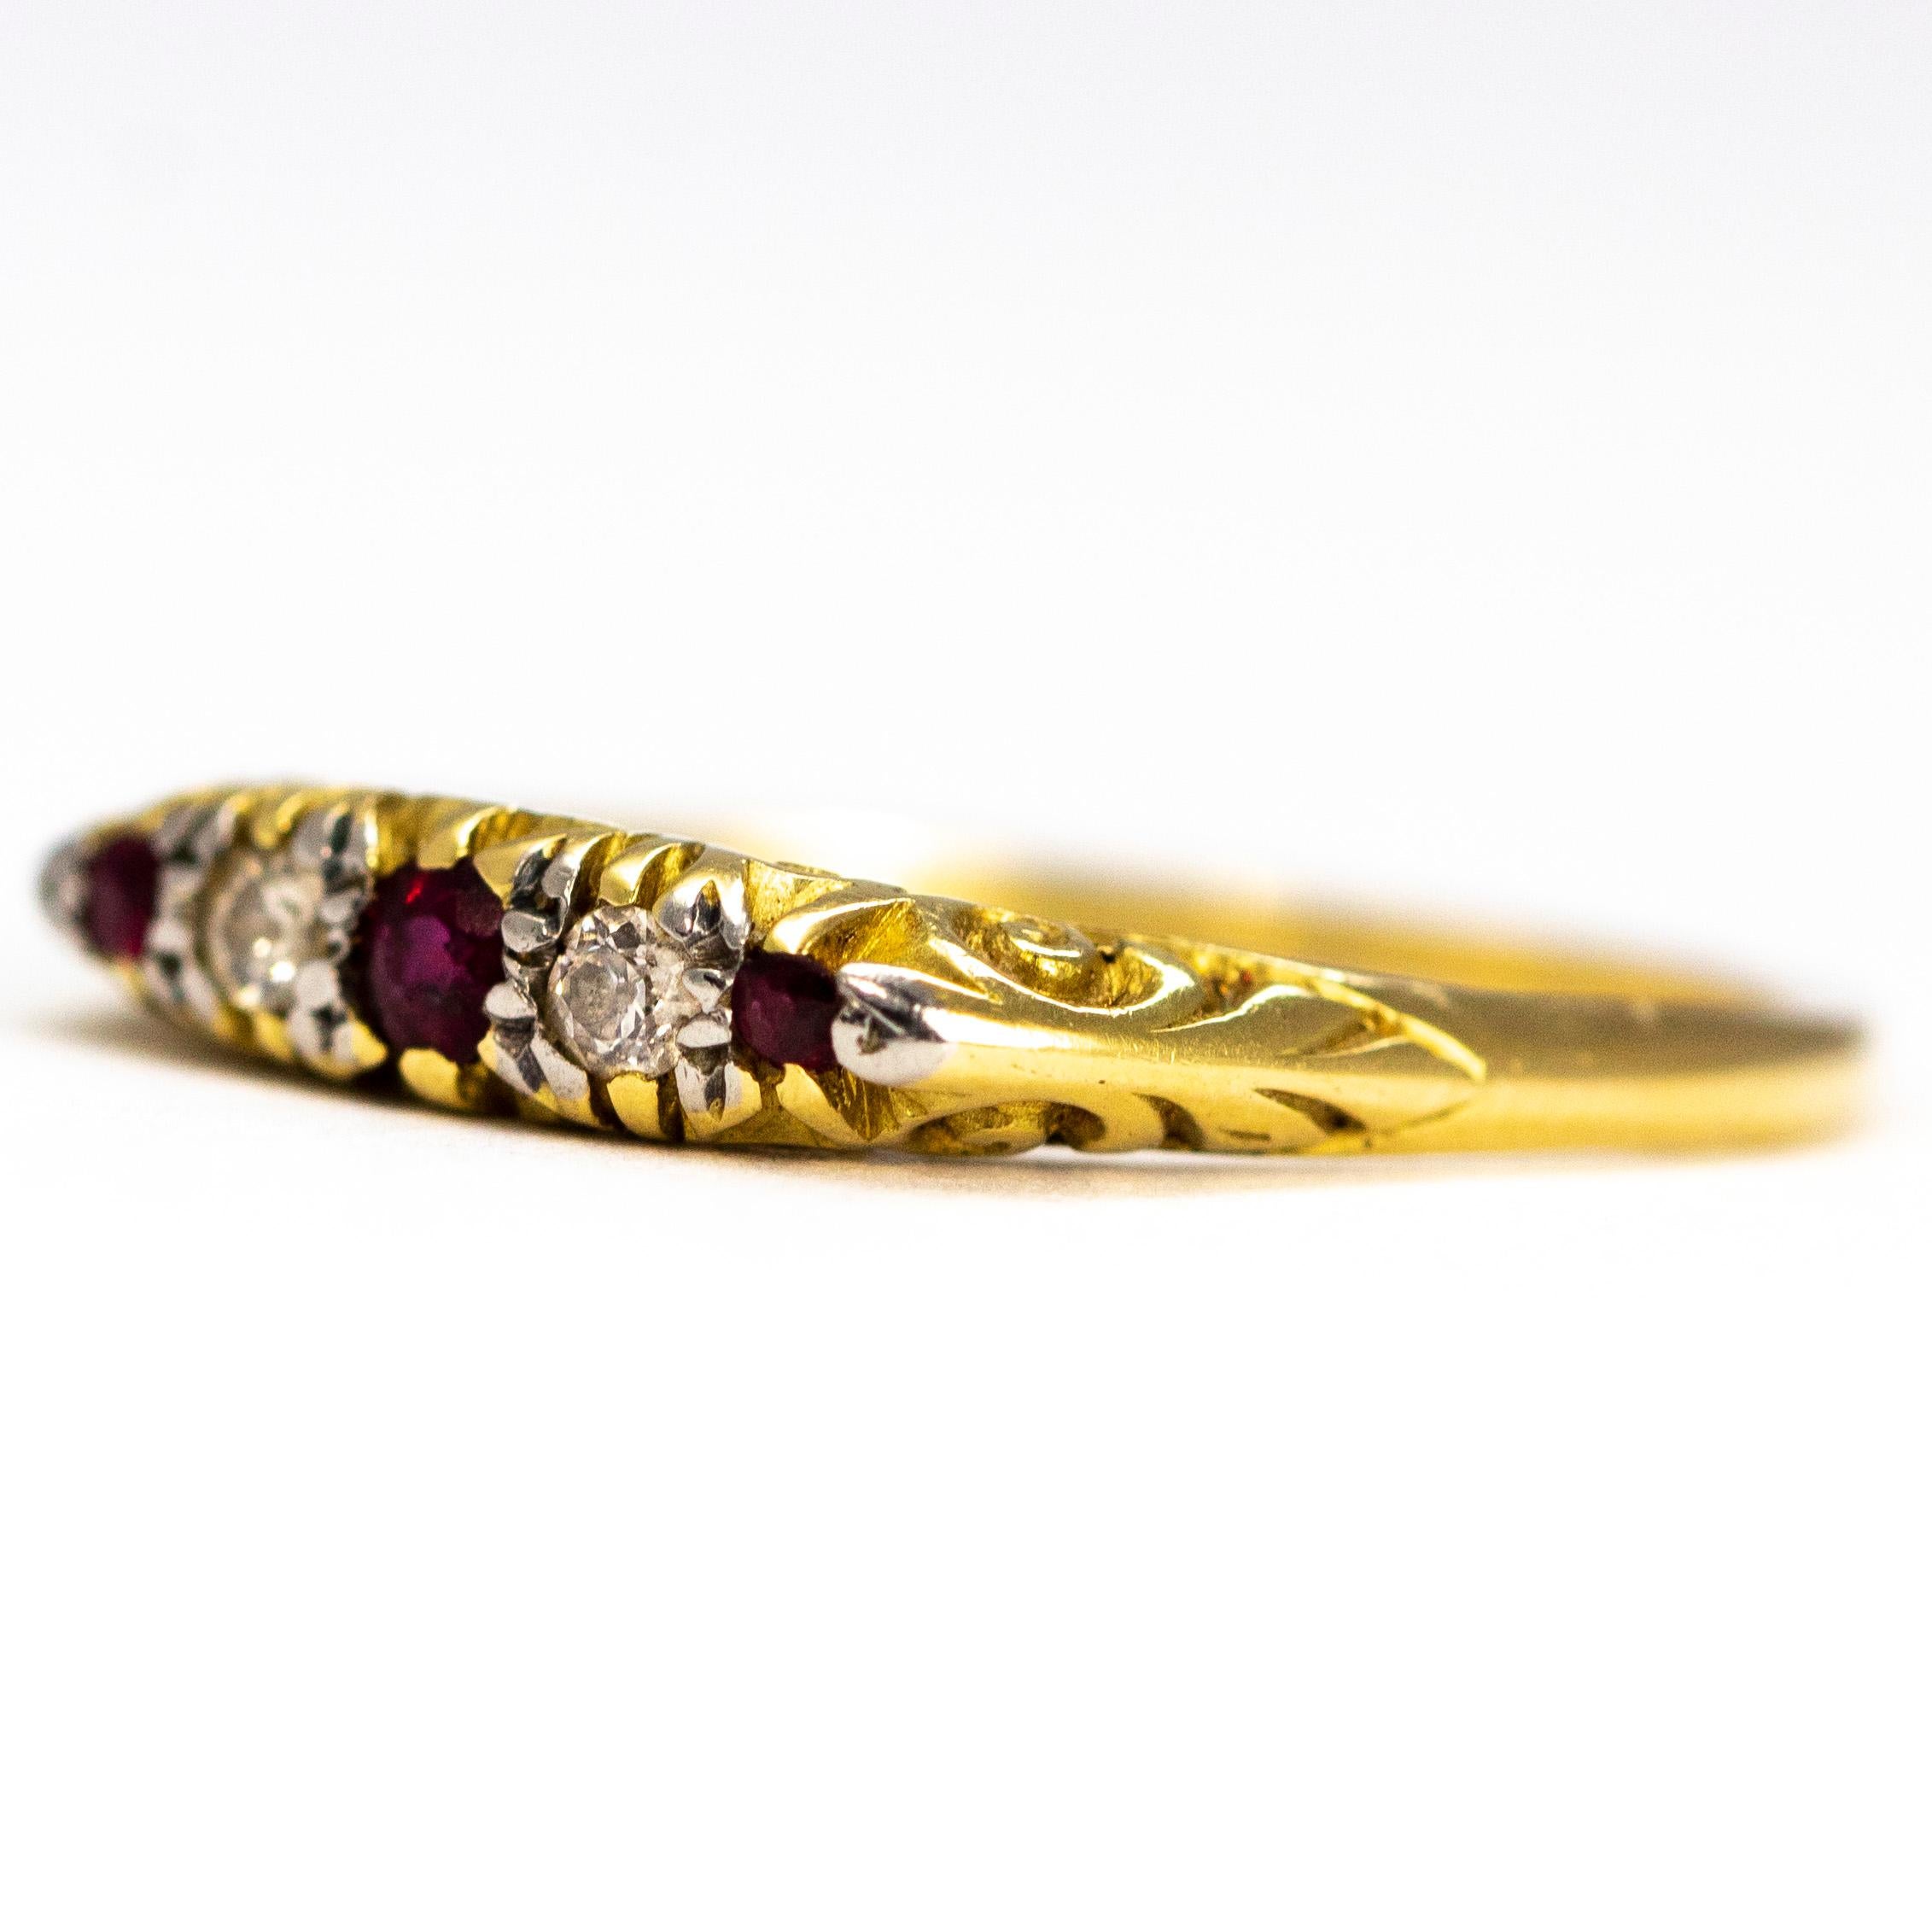 This gorgeous and delicate ring holds five stones. The centre ruby measures 7pts and the two smaller rubies measure 3pts. The stones are set in platinum and the rest of the ring is modelled in 18ct gold. 

Ring Size: O 1/2 or 7 1/2
Band Width: 3.6mm